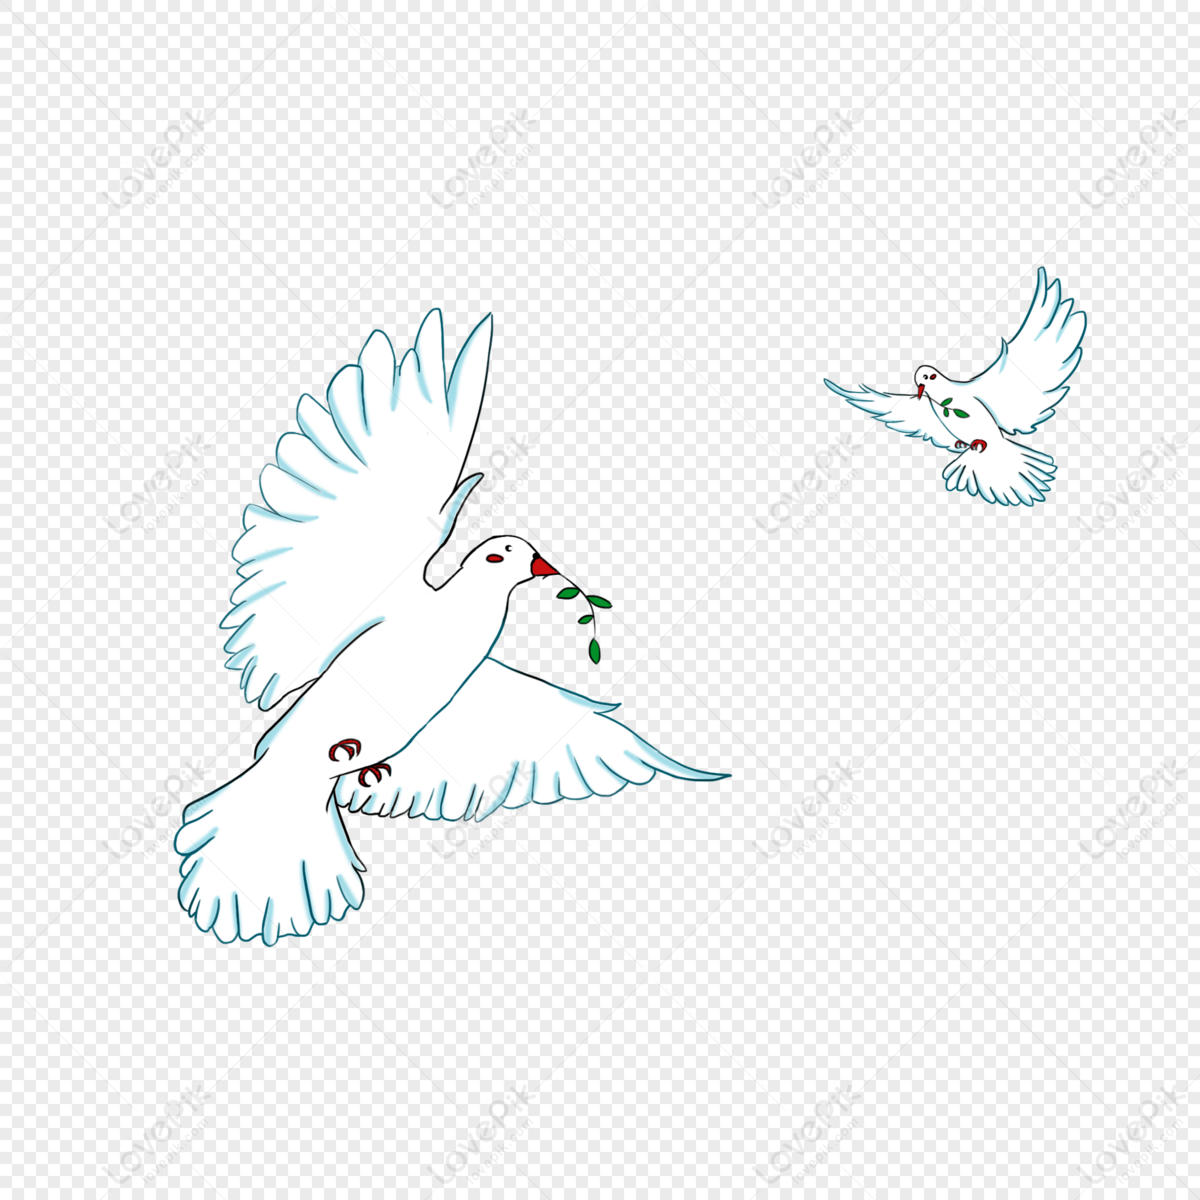 Hand Drawn Cartoon And Dove PNG Transparent Image And Clipart Image For  Free Download - Lovepik | 400447997